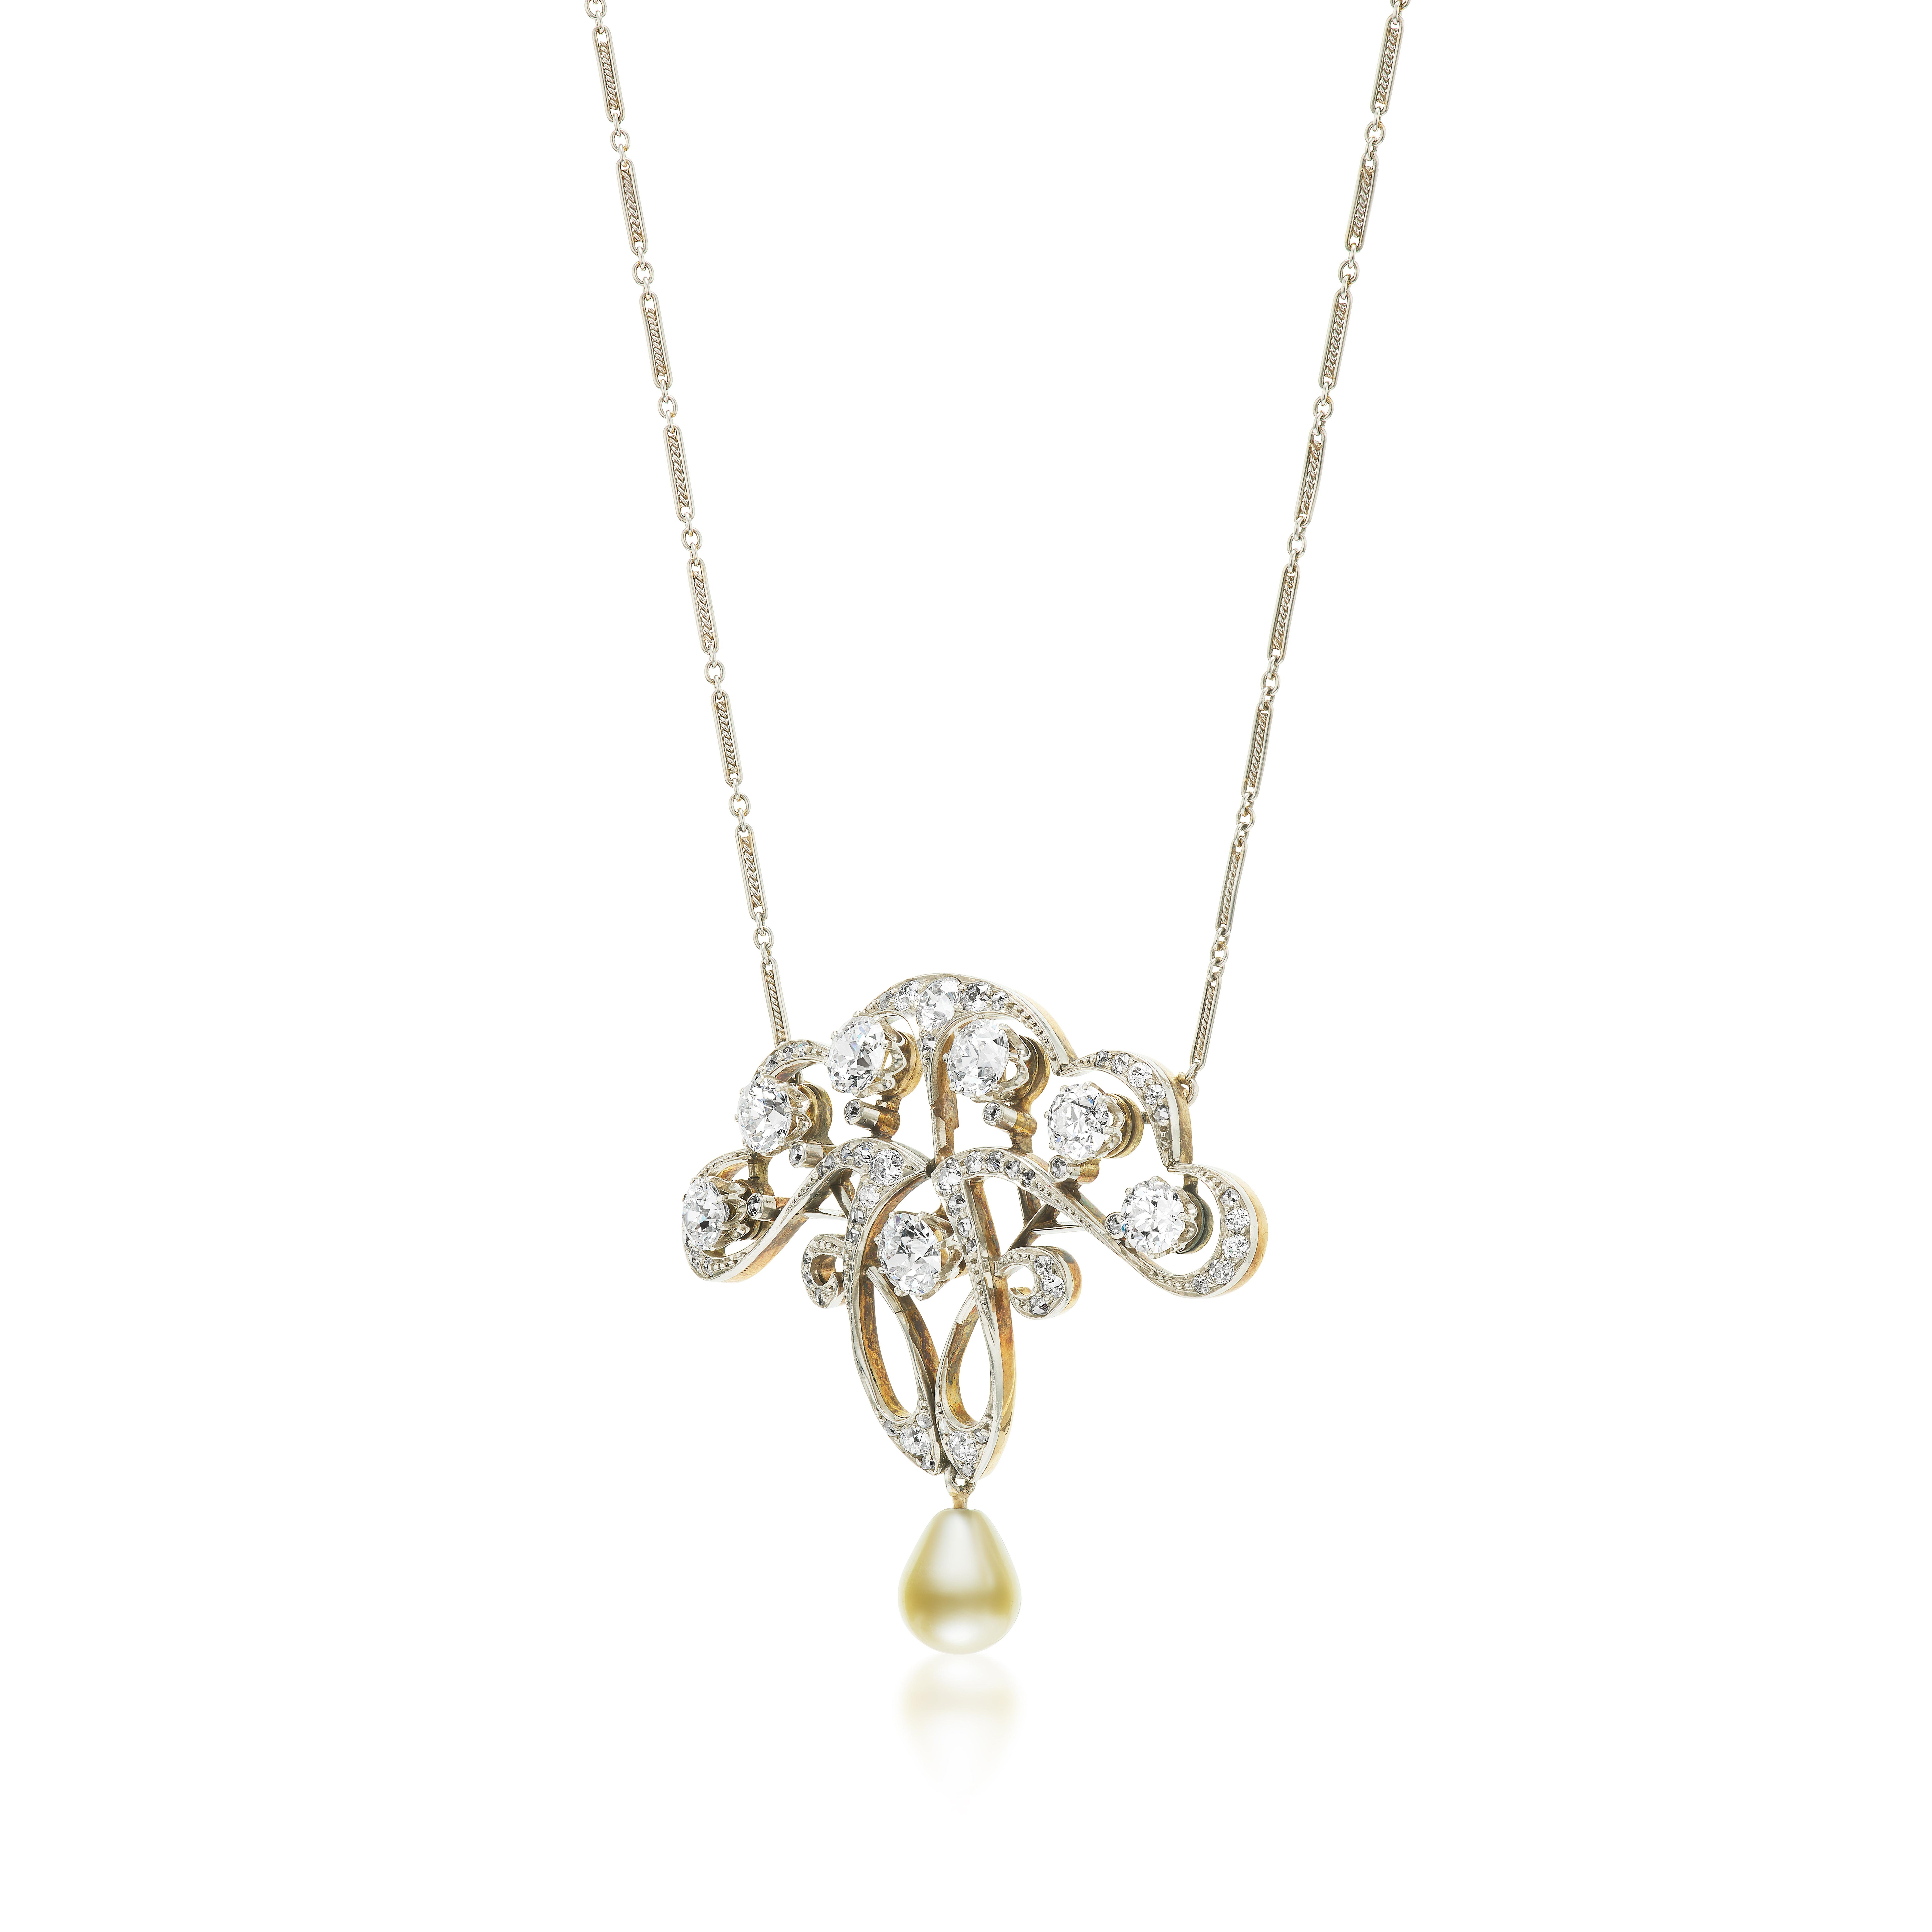 Elegant and impressive antique pendant featuring 7 round brilliant diamonds weighing approximately 3.50 carats and an impressive pearl drop in excess of 8mm. Pendants of this quality and design were coveted in the Edwardian period of the late